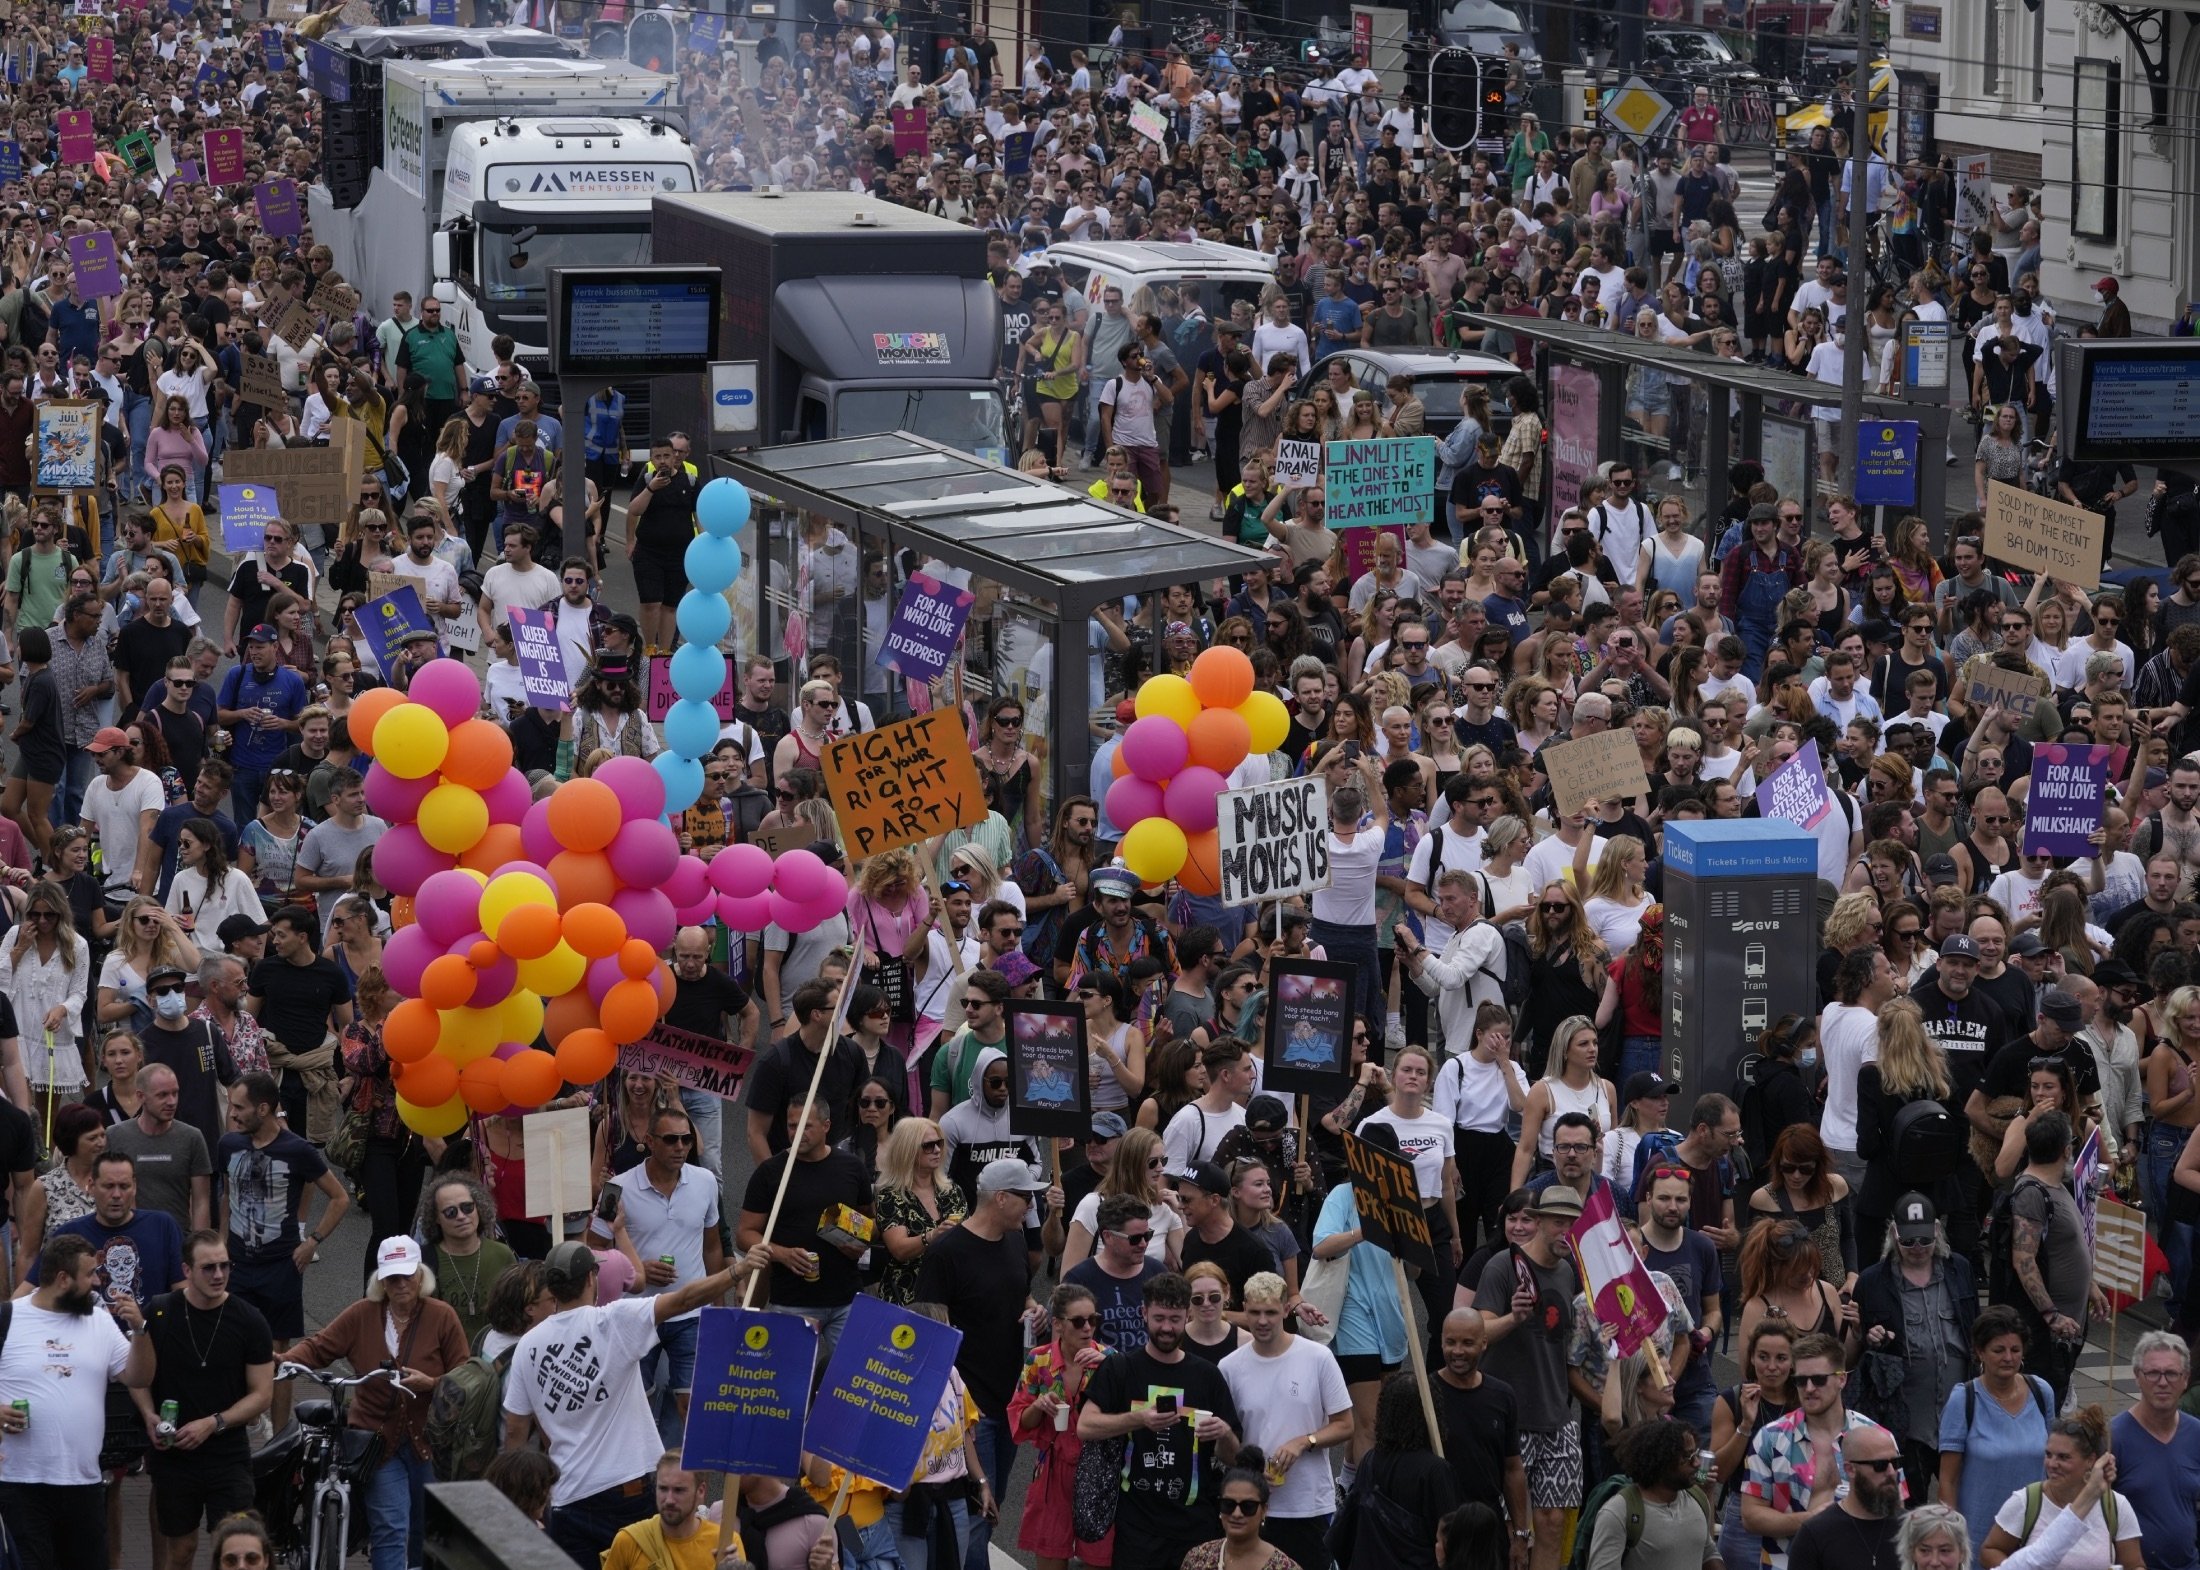 Thousands of fans of music festivals stage protests against the government's COVID-19 restrictions on large-scale outdoor events, in Amsterdam, Netherlands, Aug. 21, 2021. (AP Photo)